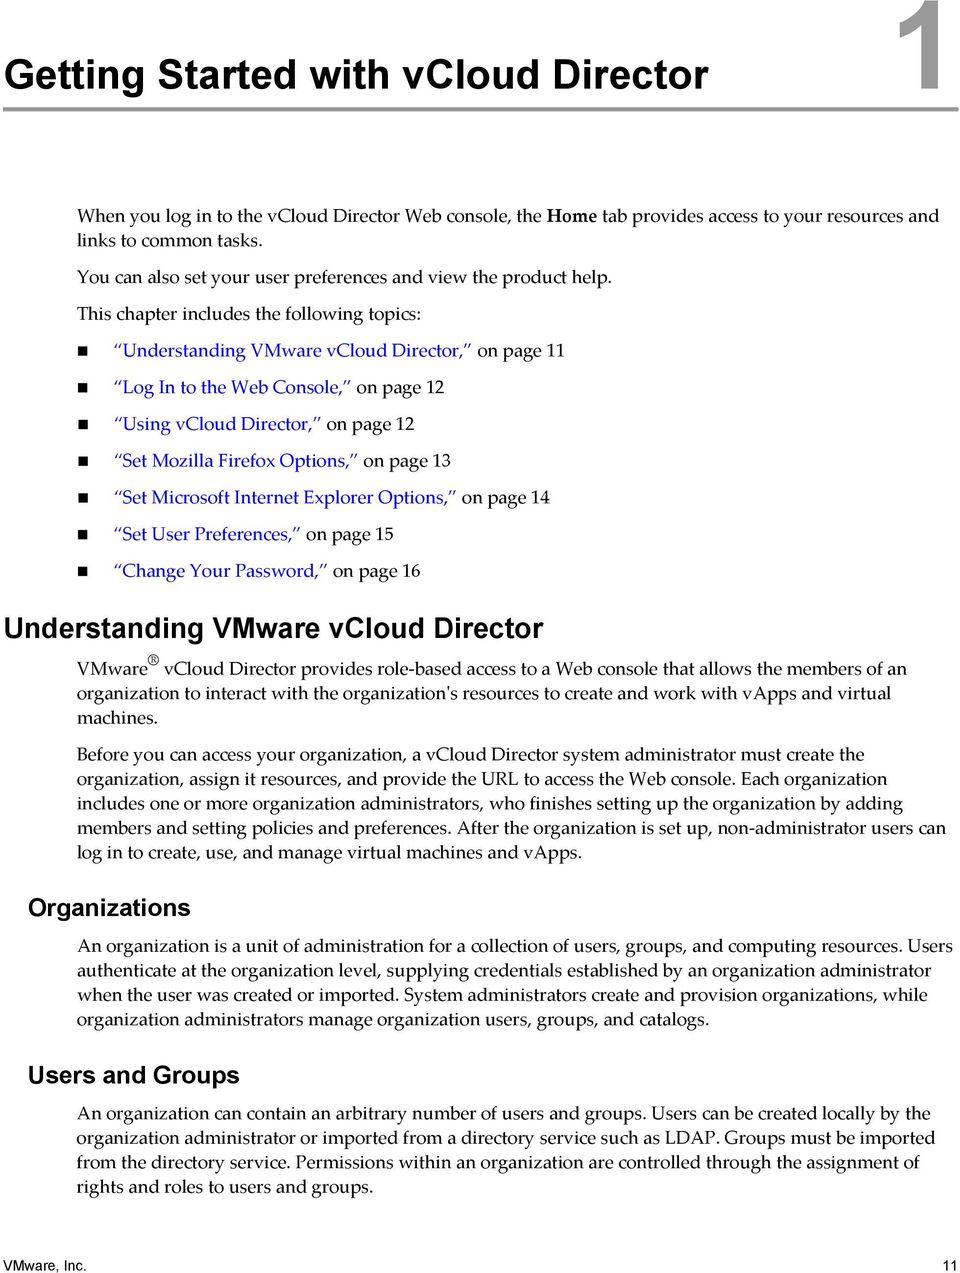 This chapter includes the following topics: Understanding VMware vcloud Director, on page 11 Log In to the Web Console, on page 12 Using vcloud Director, on page 12 Set Mozilla Firefox Options, on